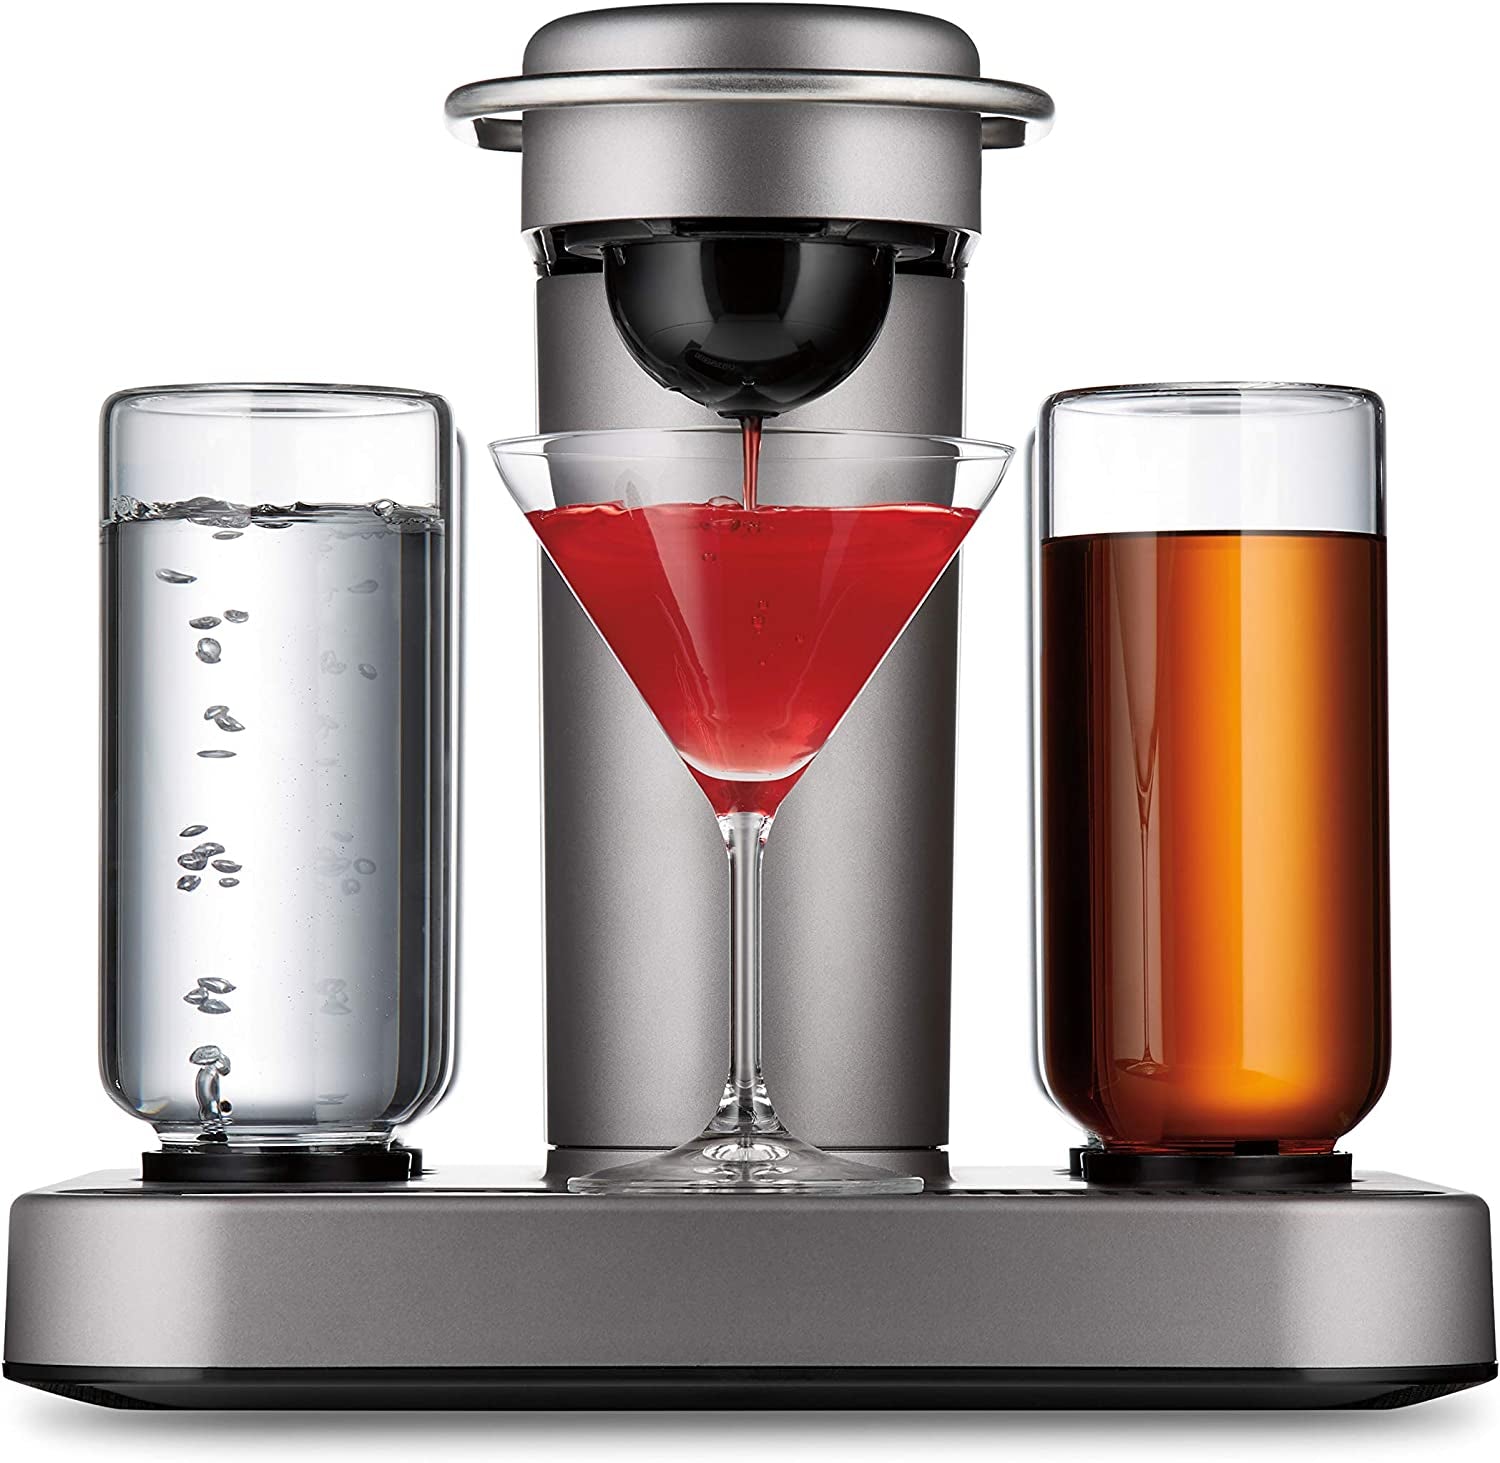 Premium Cocktail and Margarita Machine for the Home Bar with Push-Button Simplicity and an Easy to Clean Design (55300)